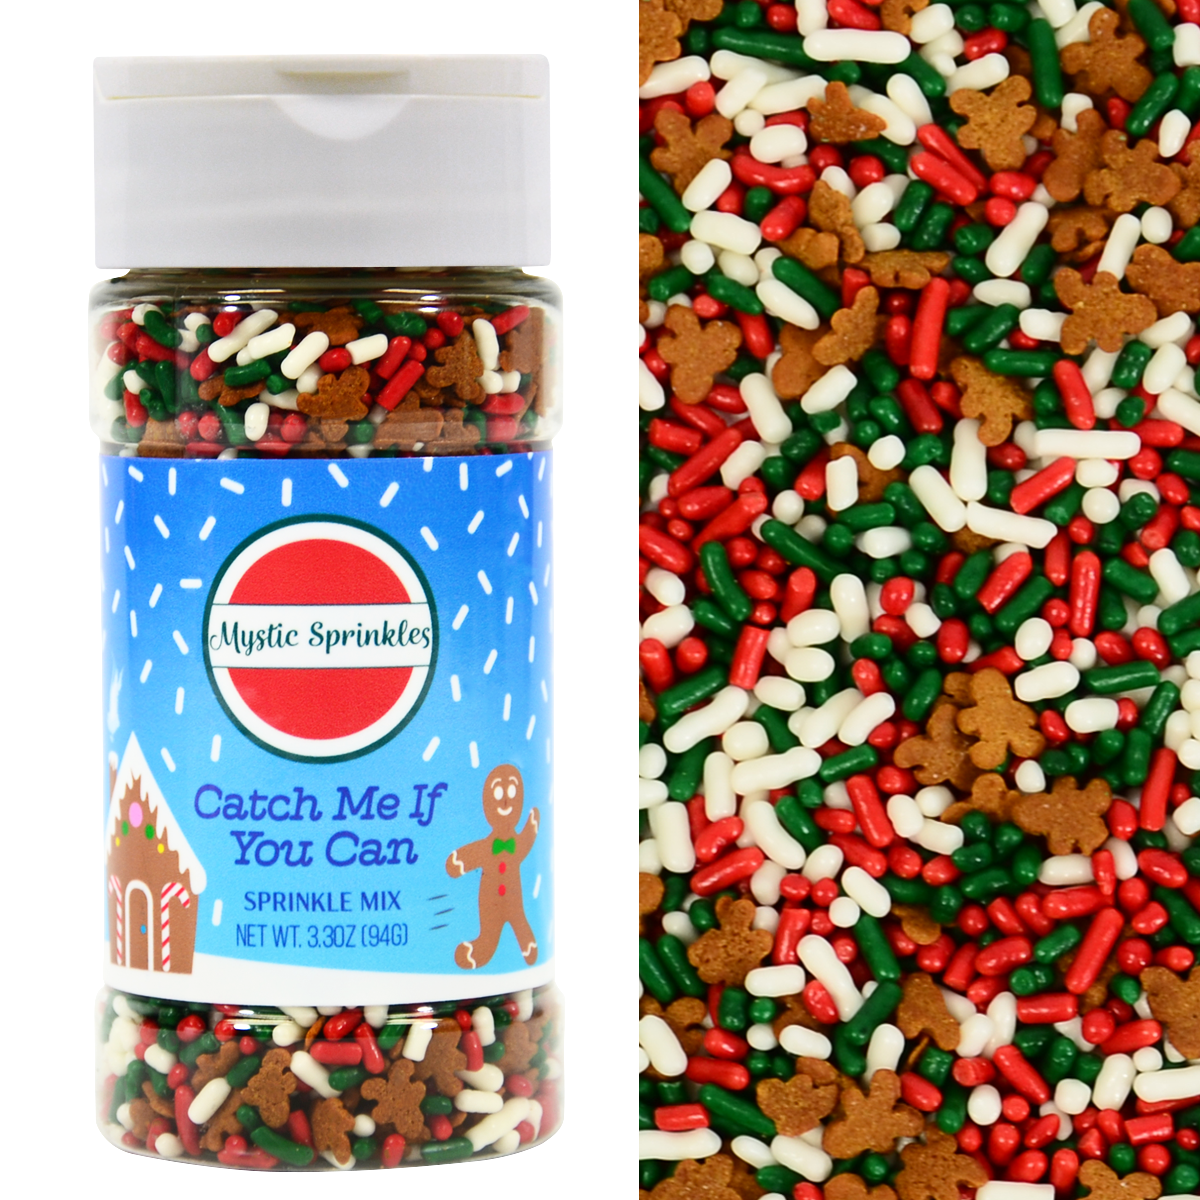 Catch Me If You Can! Sprinkle Mix 3.3oz